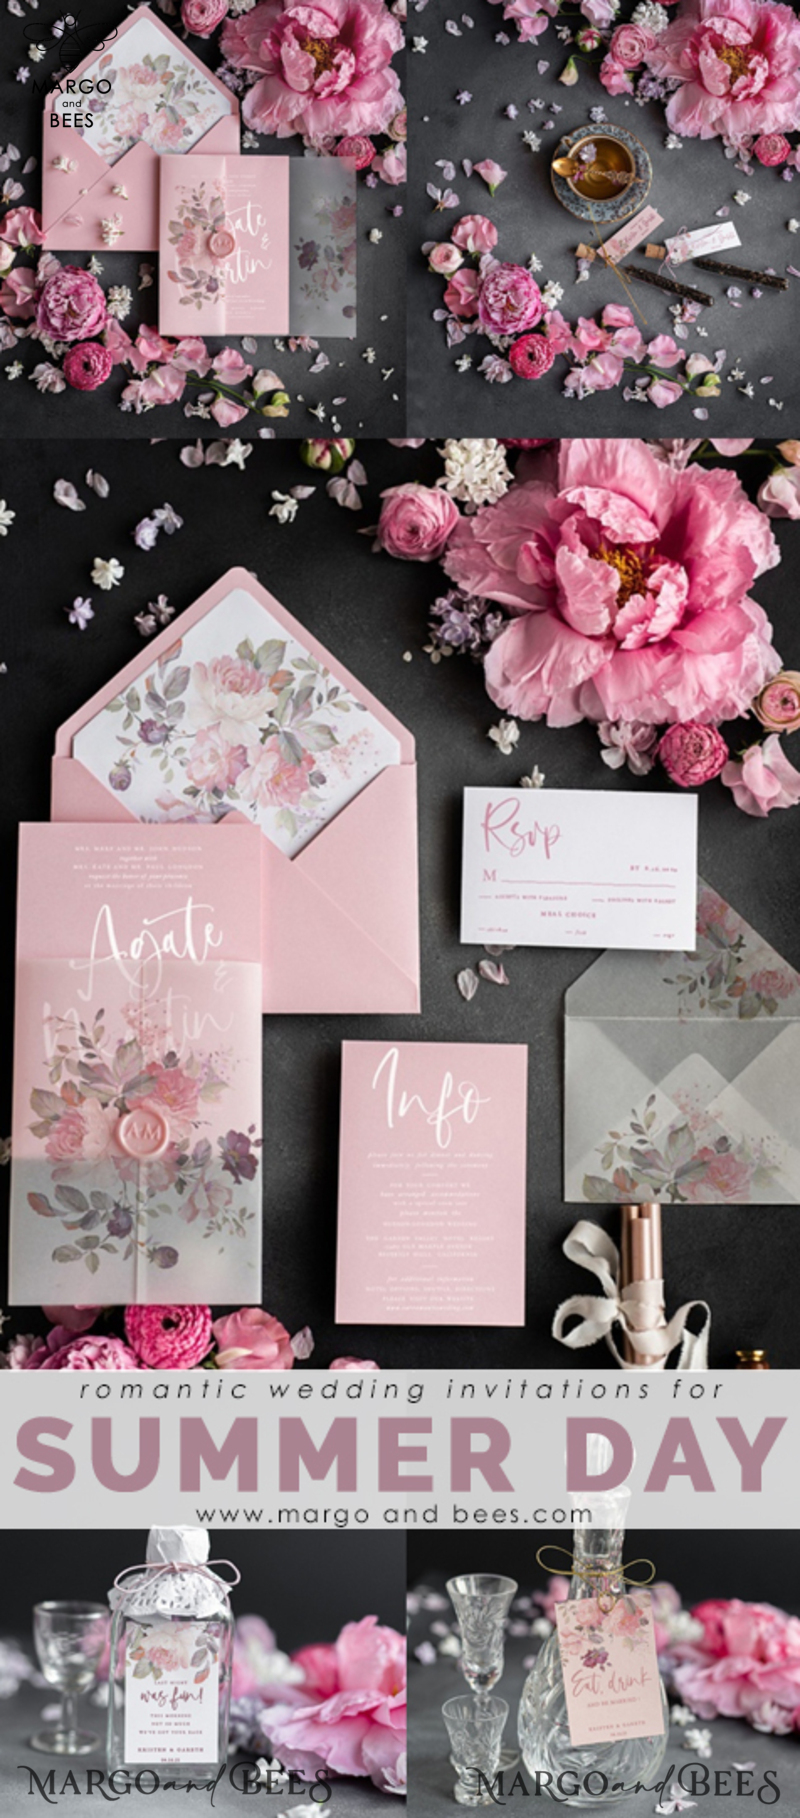 Glamour Pink Wedding Invitations: Romantic Floral Wedding Invites with Luxury Vellum Wrapping - Delicate and Handmade Wedding Stationery-1